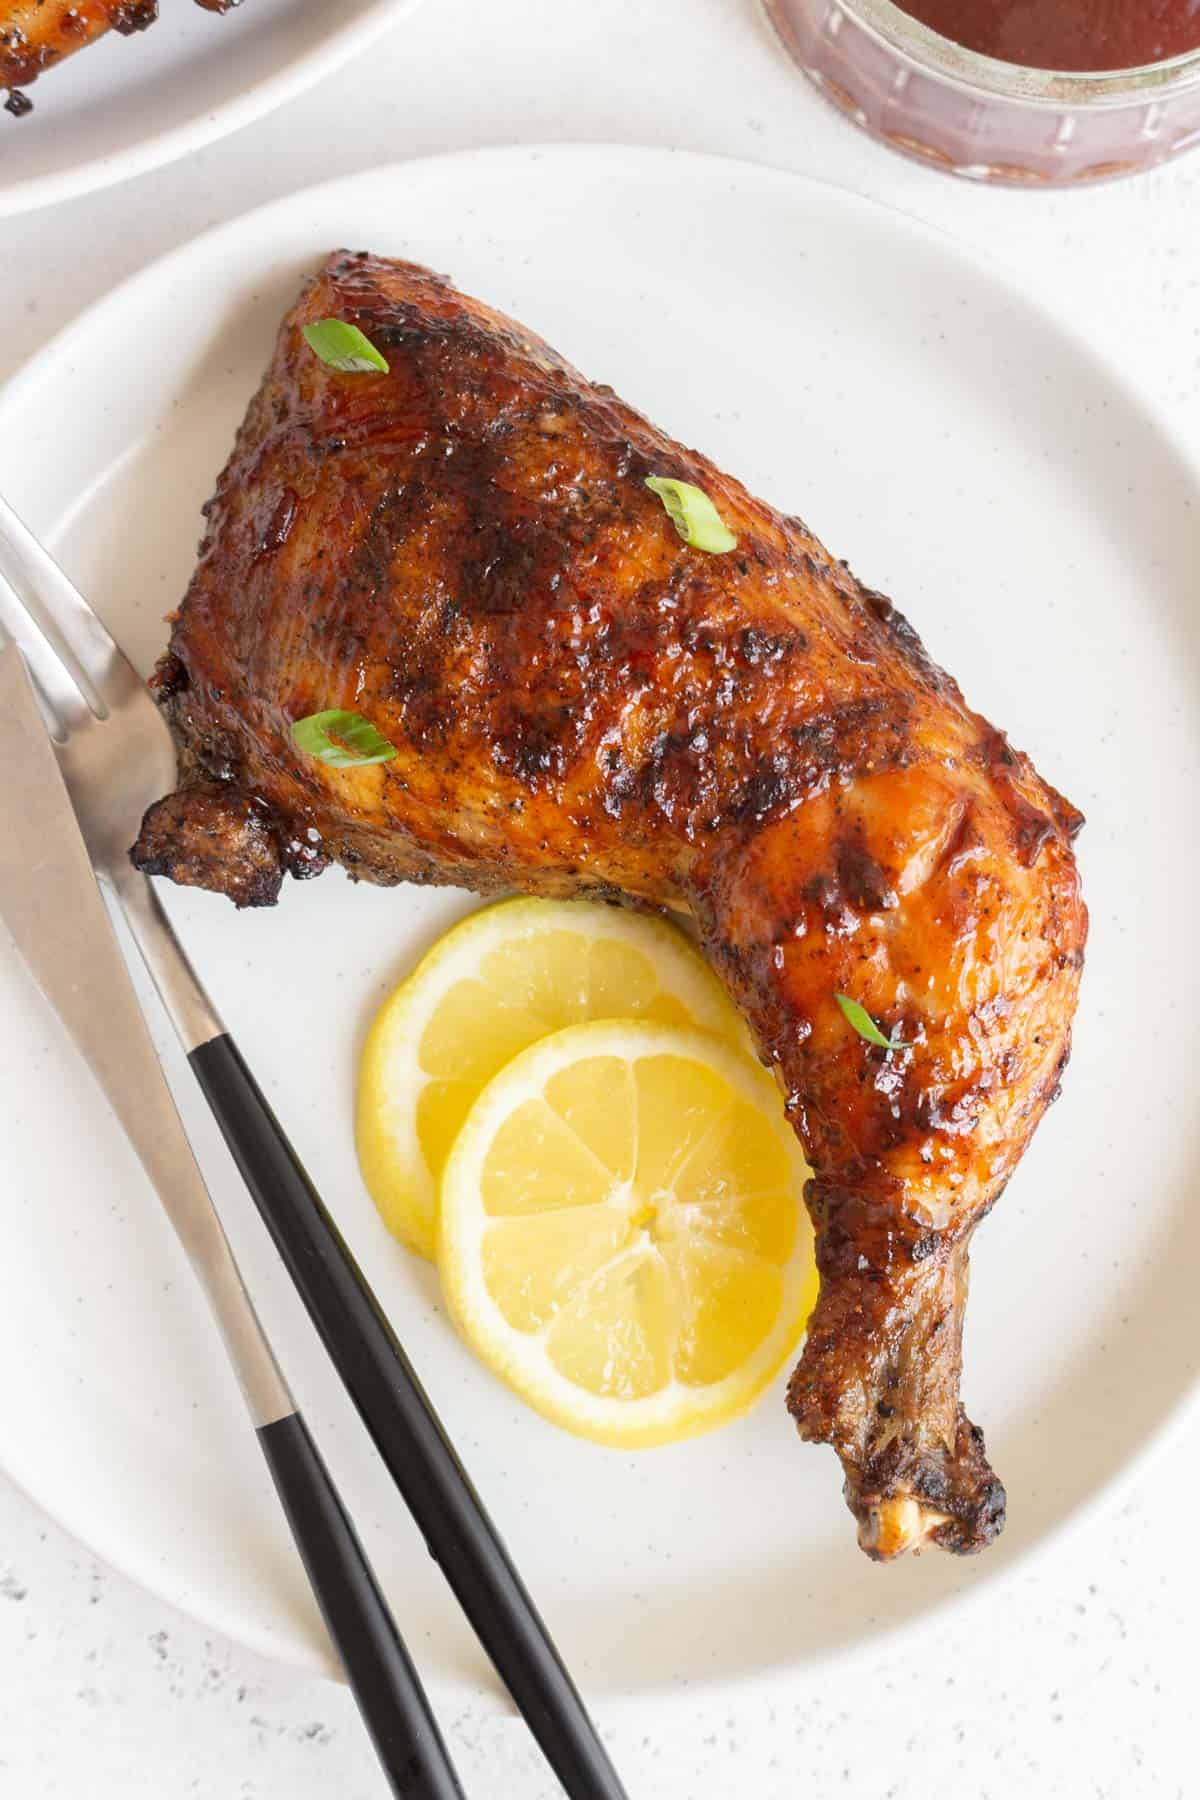 A grilled chicken leg quarter on a plate with two slices of lemon and a fork and knife beside it.